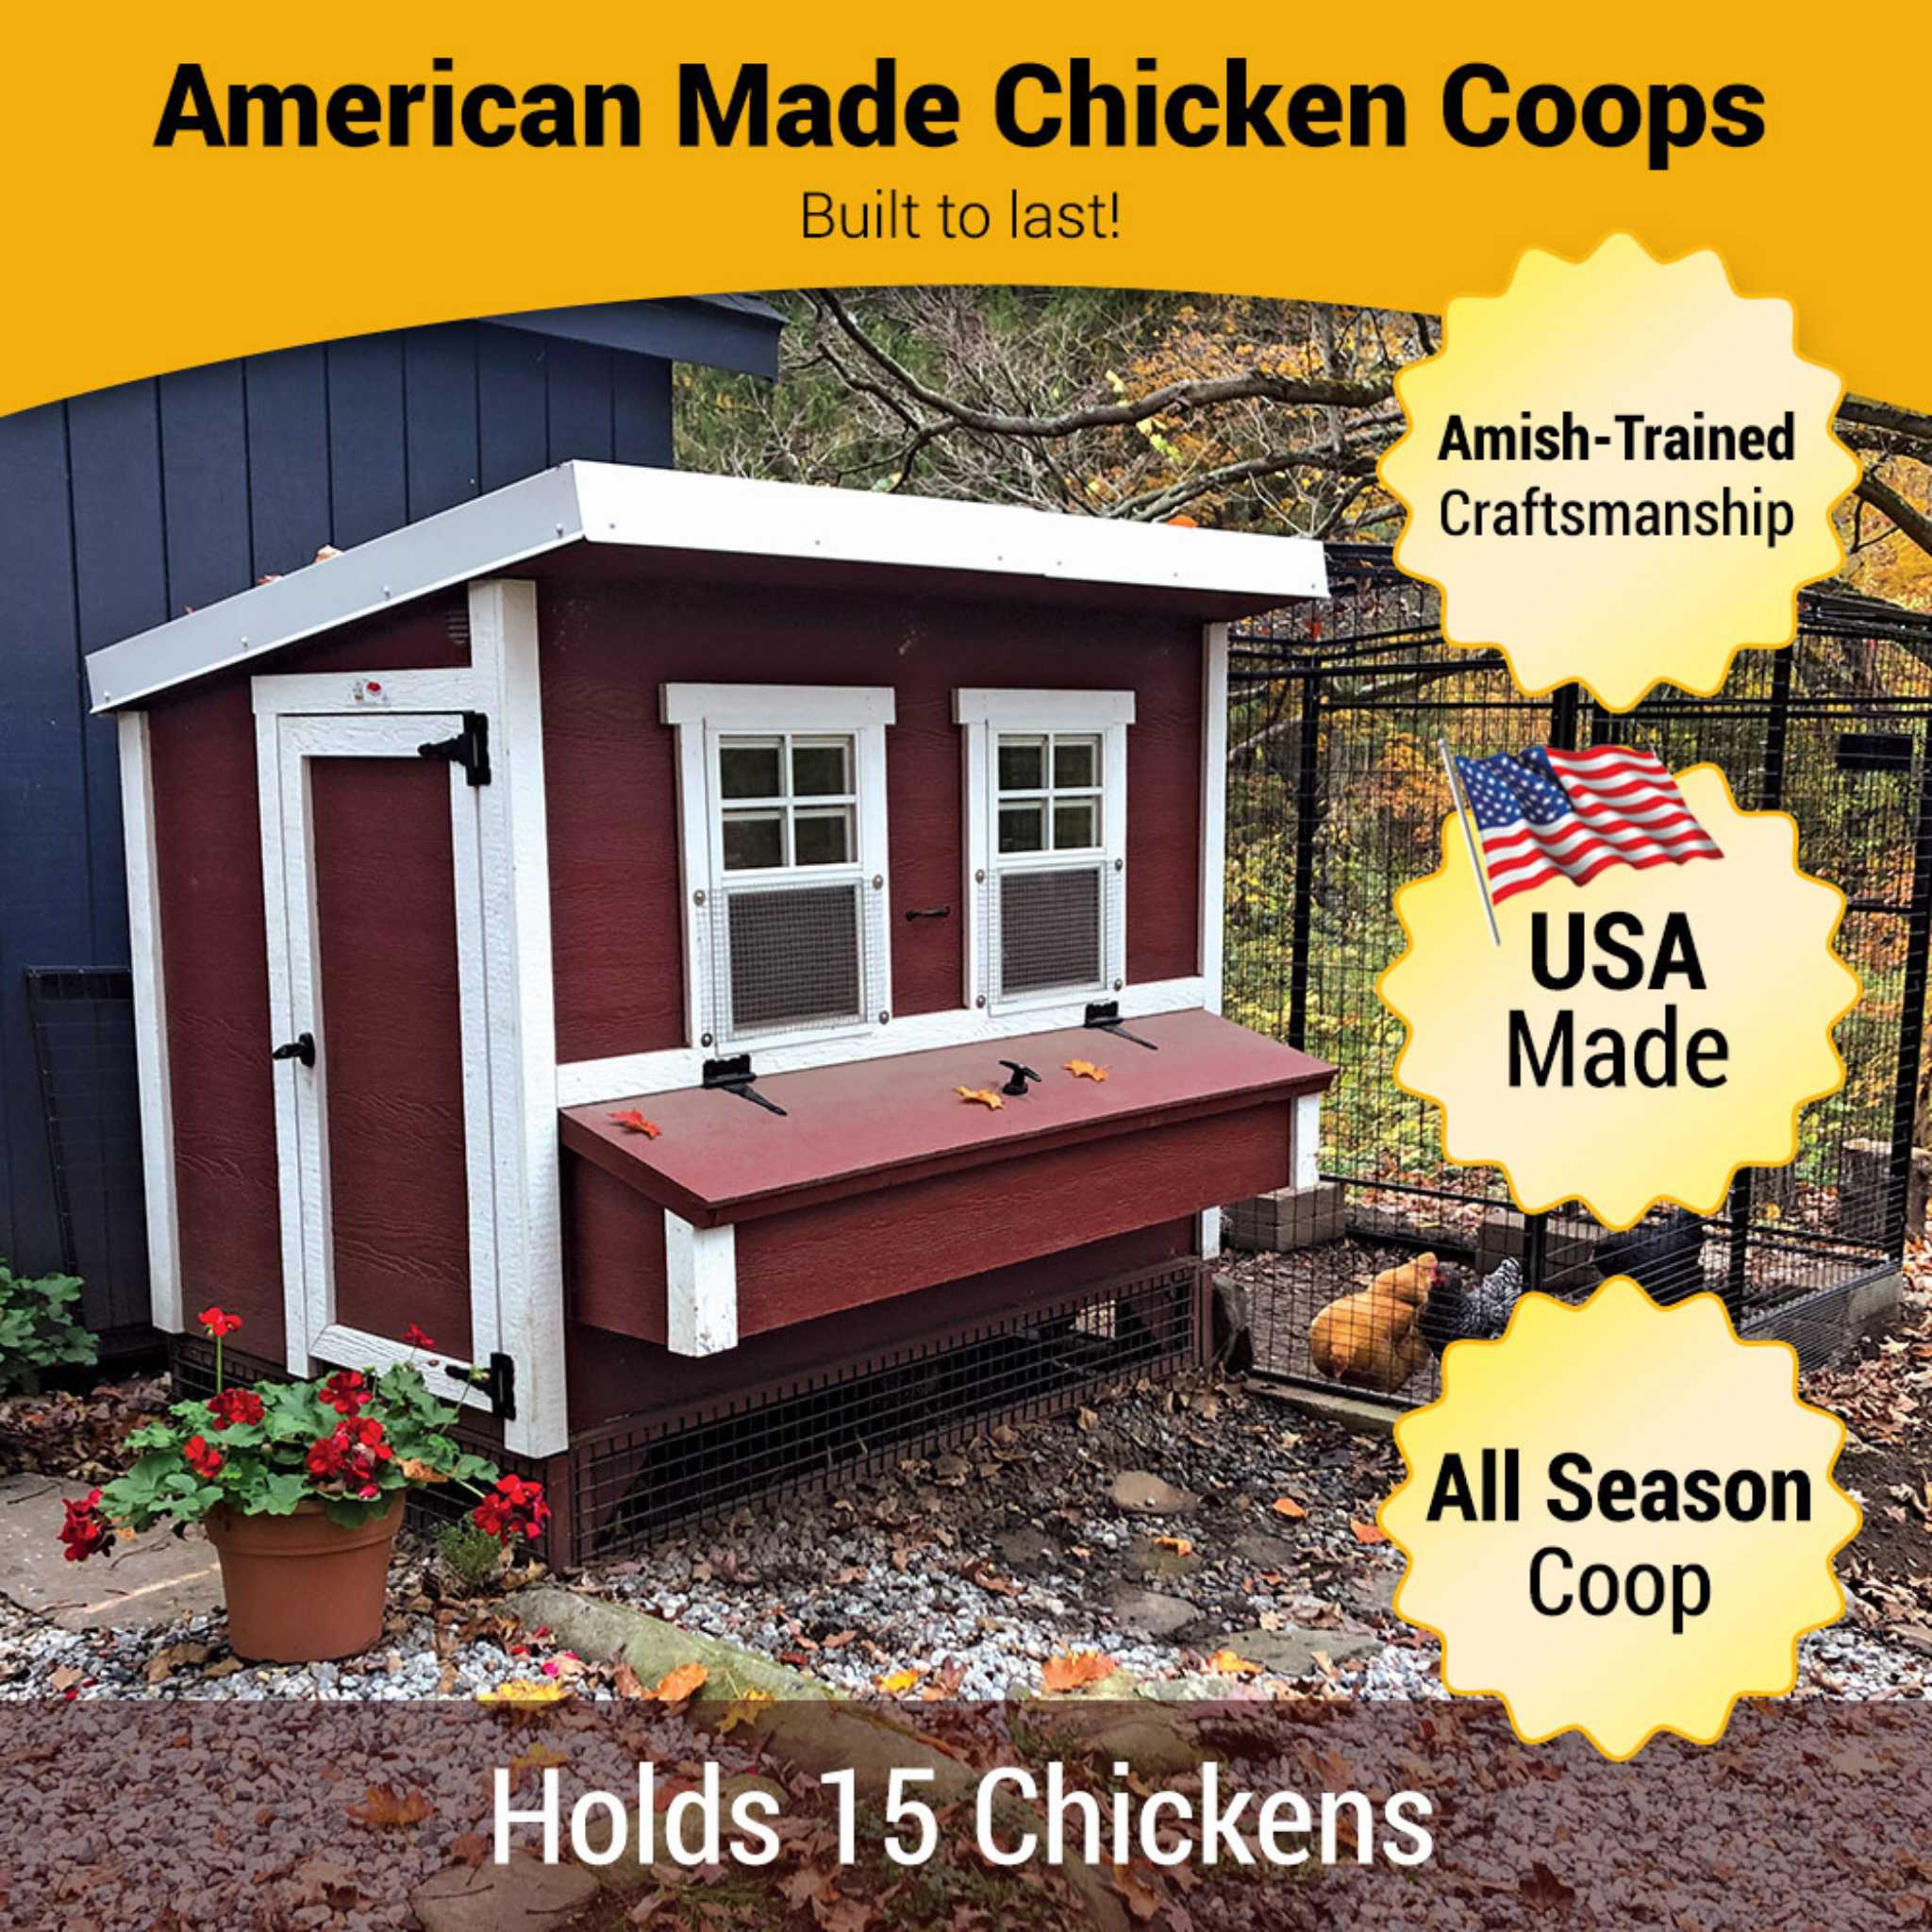 Hatching Time OverEZ. Infographic shows Large chicken coop can hold 15 chickens, is made in the USA with Amish-trained craftsmanship and is good for all seasons. Chickens can be see in large chicken run next to chicken coop.